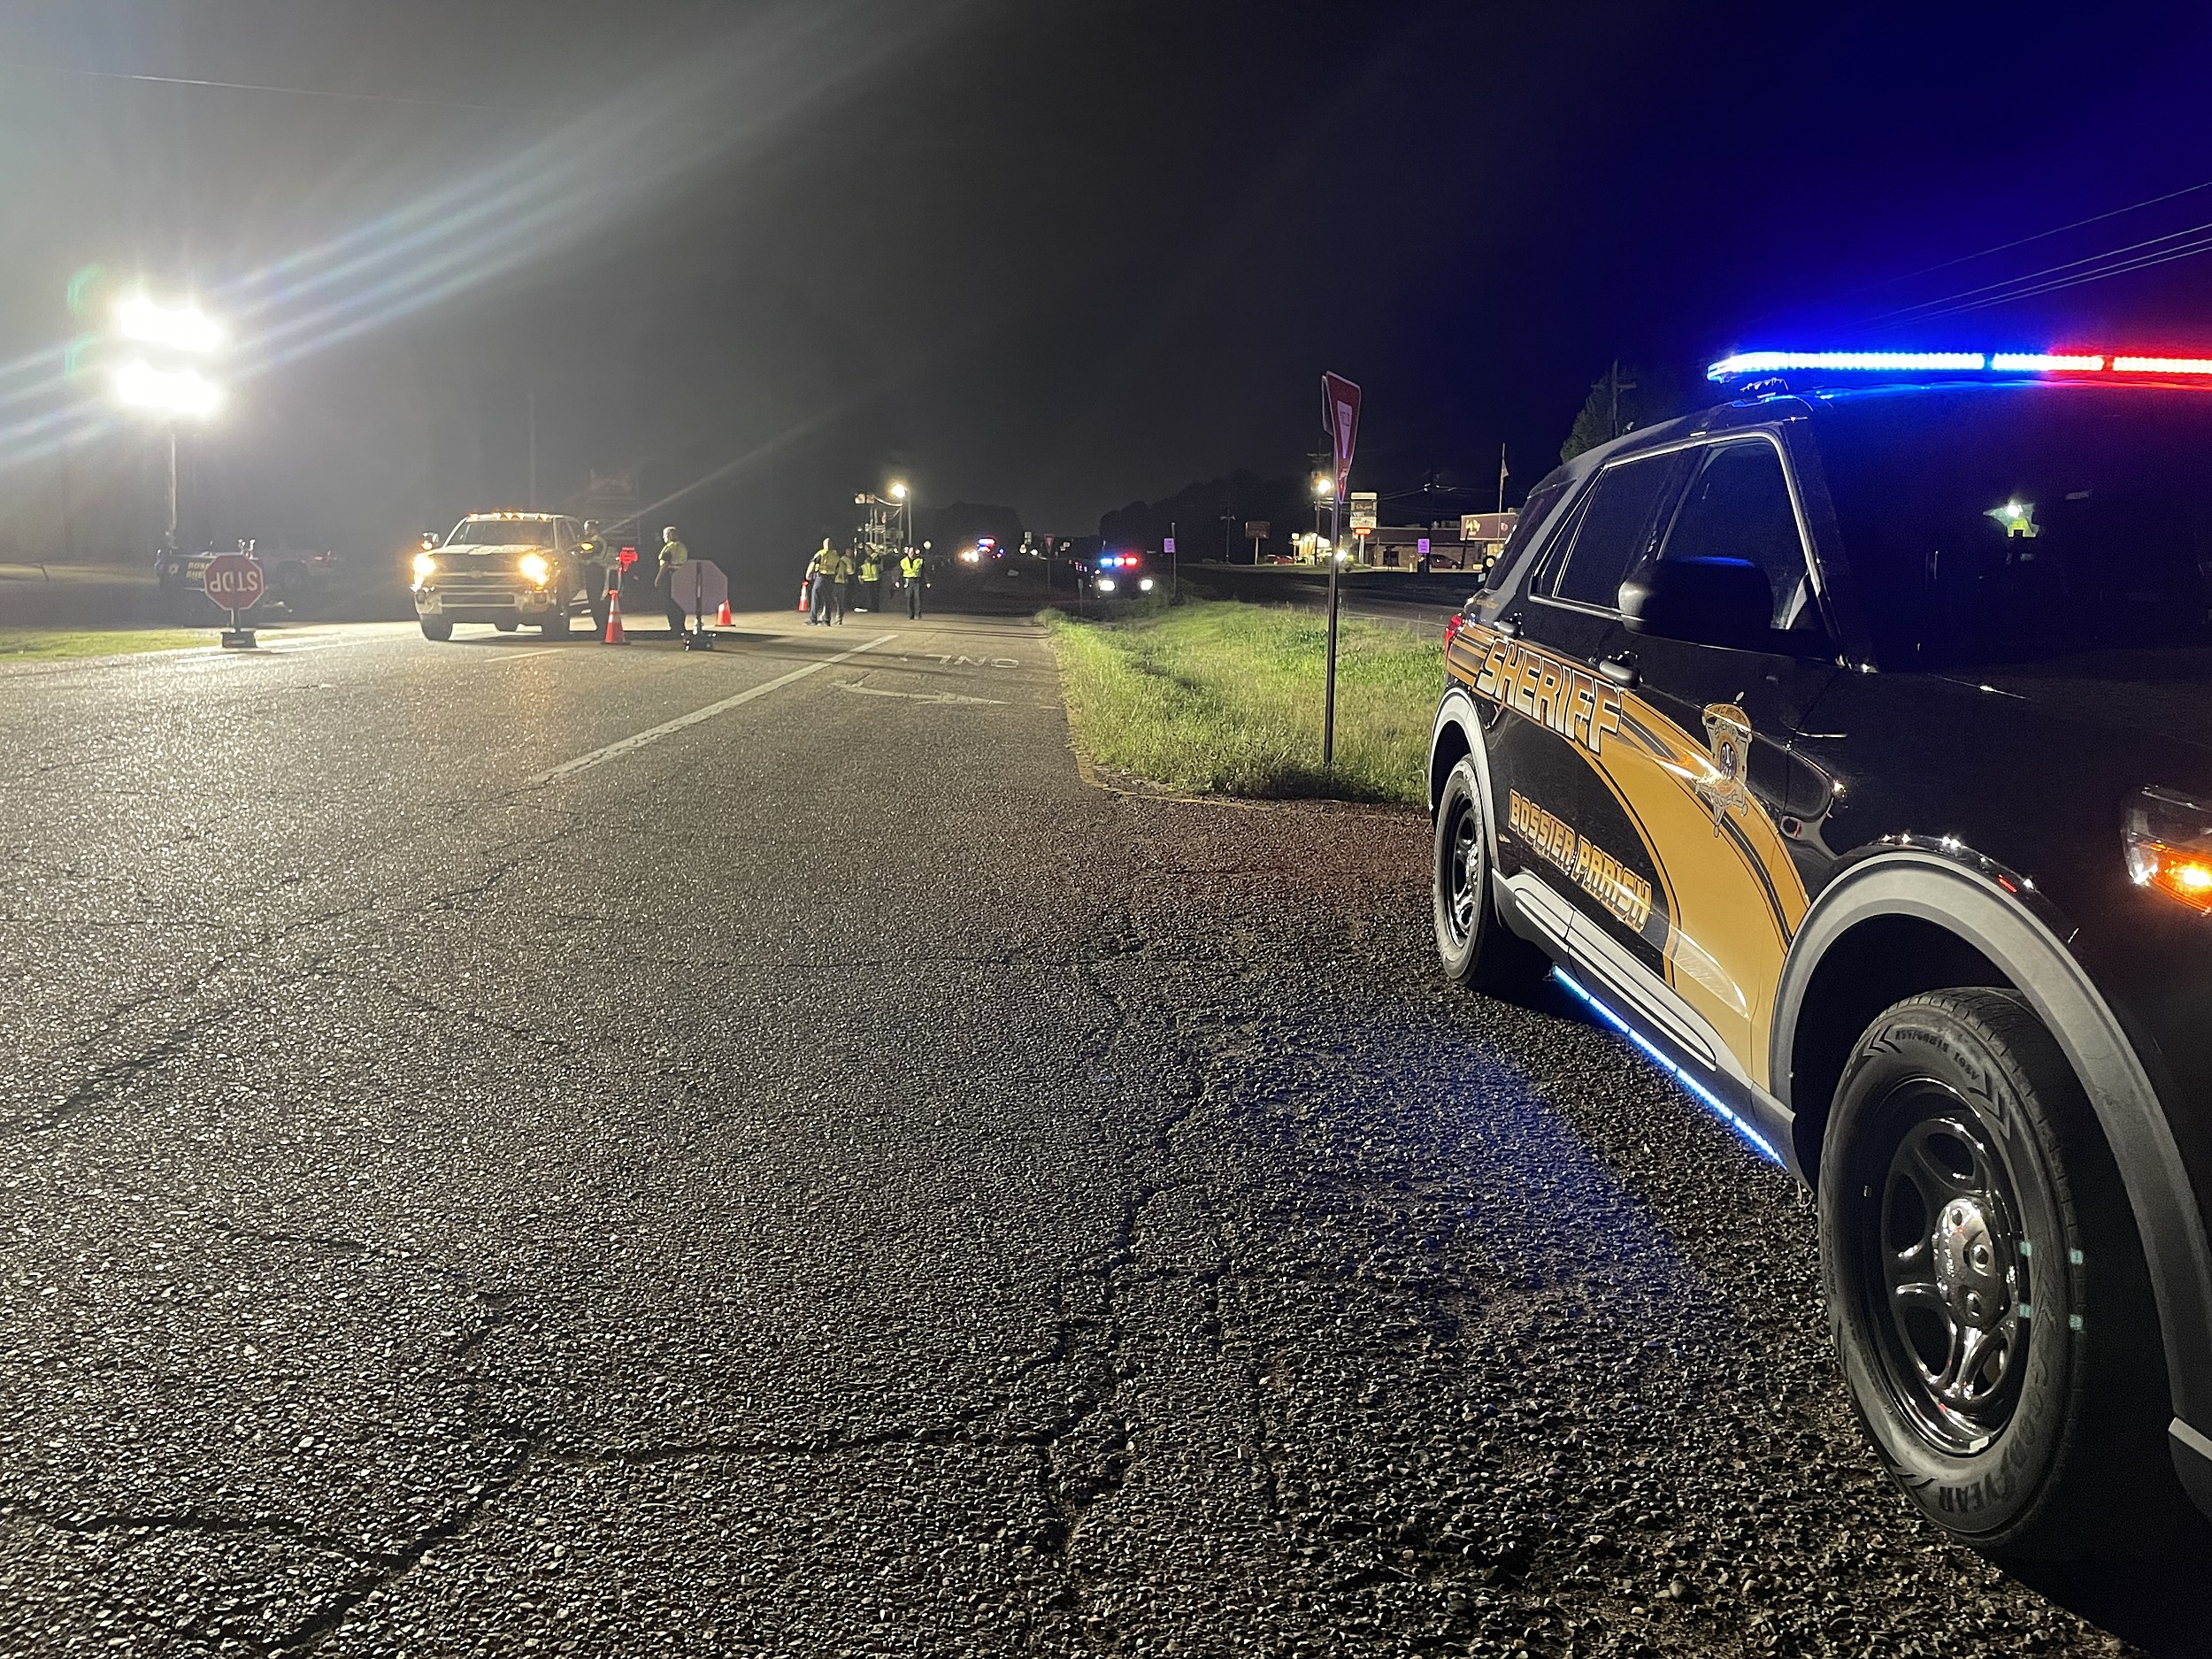 Memorial Day DWI Checkpoint in Haughton Results in Arrestsloading...